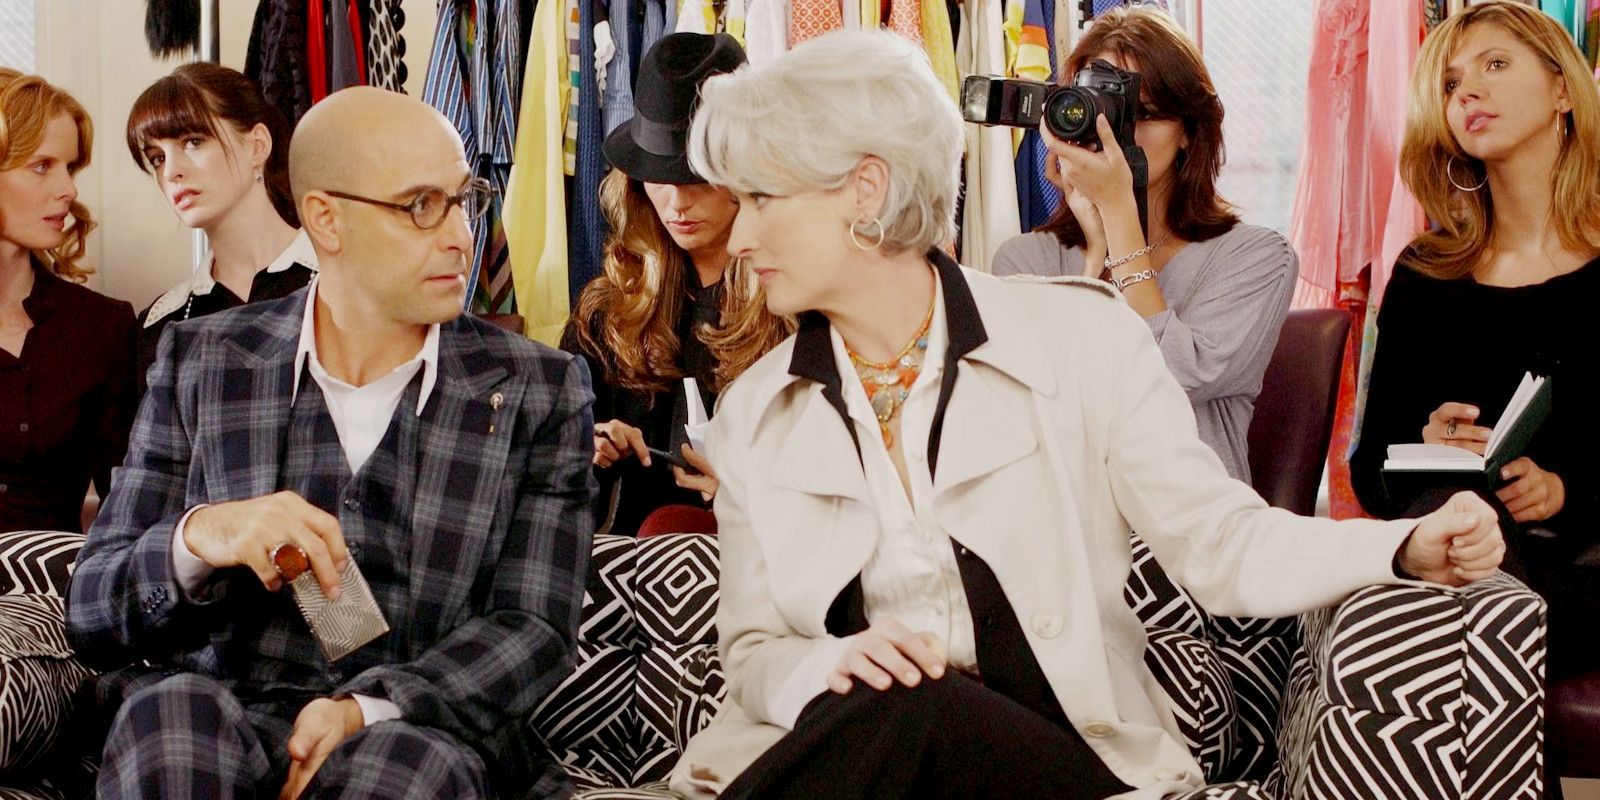 Nigel (Stanley Tucci) and Miranda (Meryl Streep) sitting next to each other on a couch during a fashion show in The Devil Wears Prada.